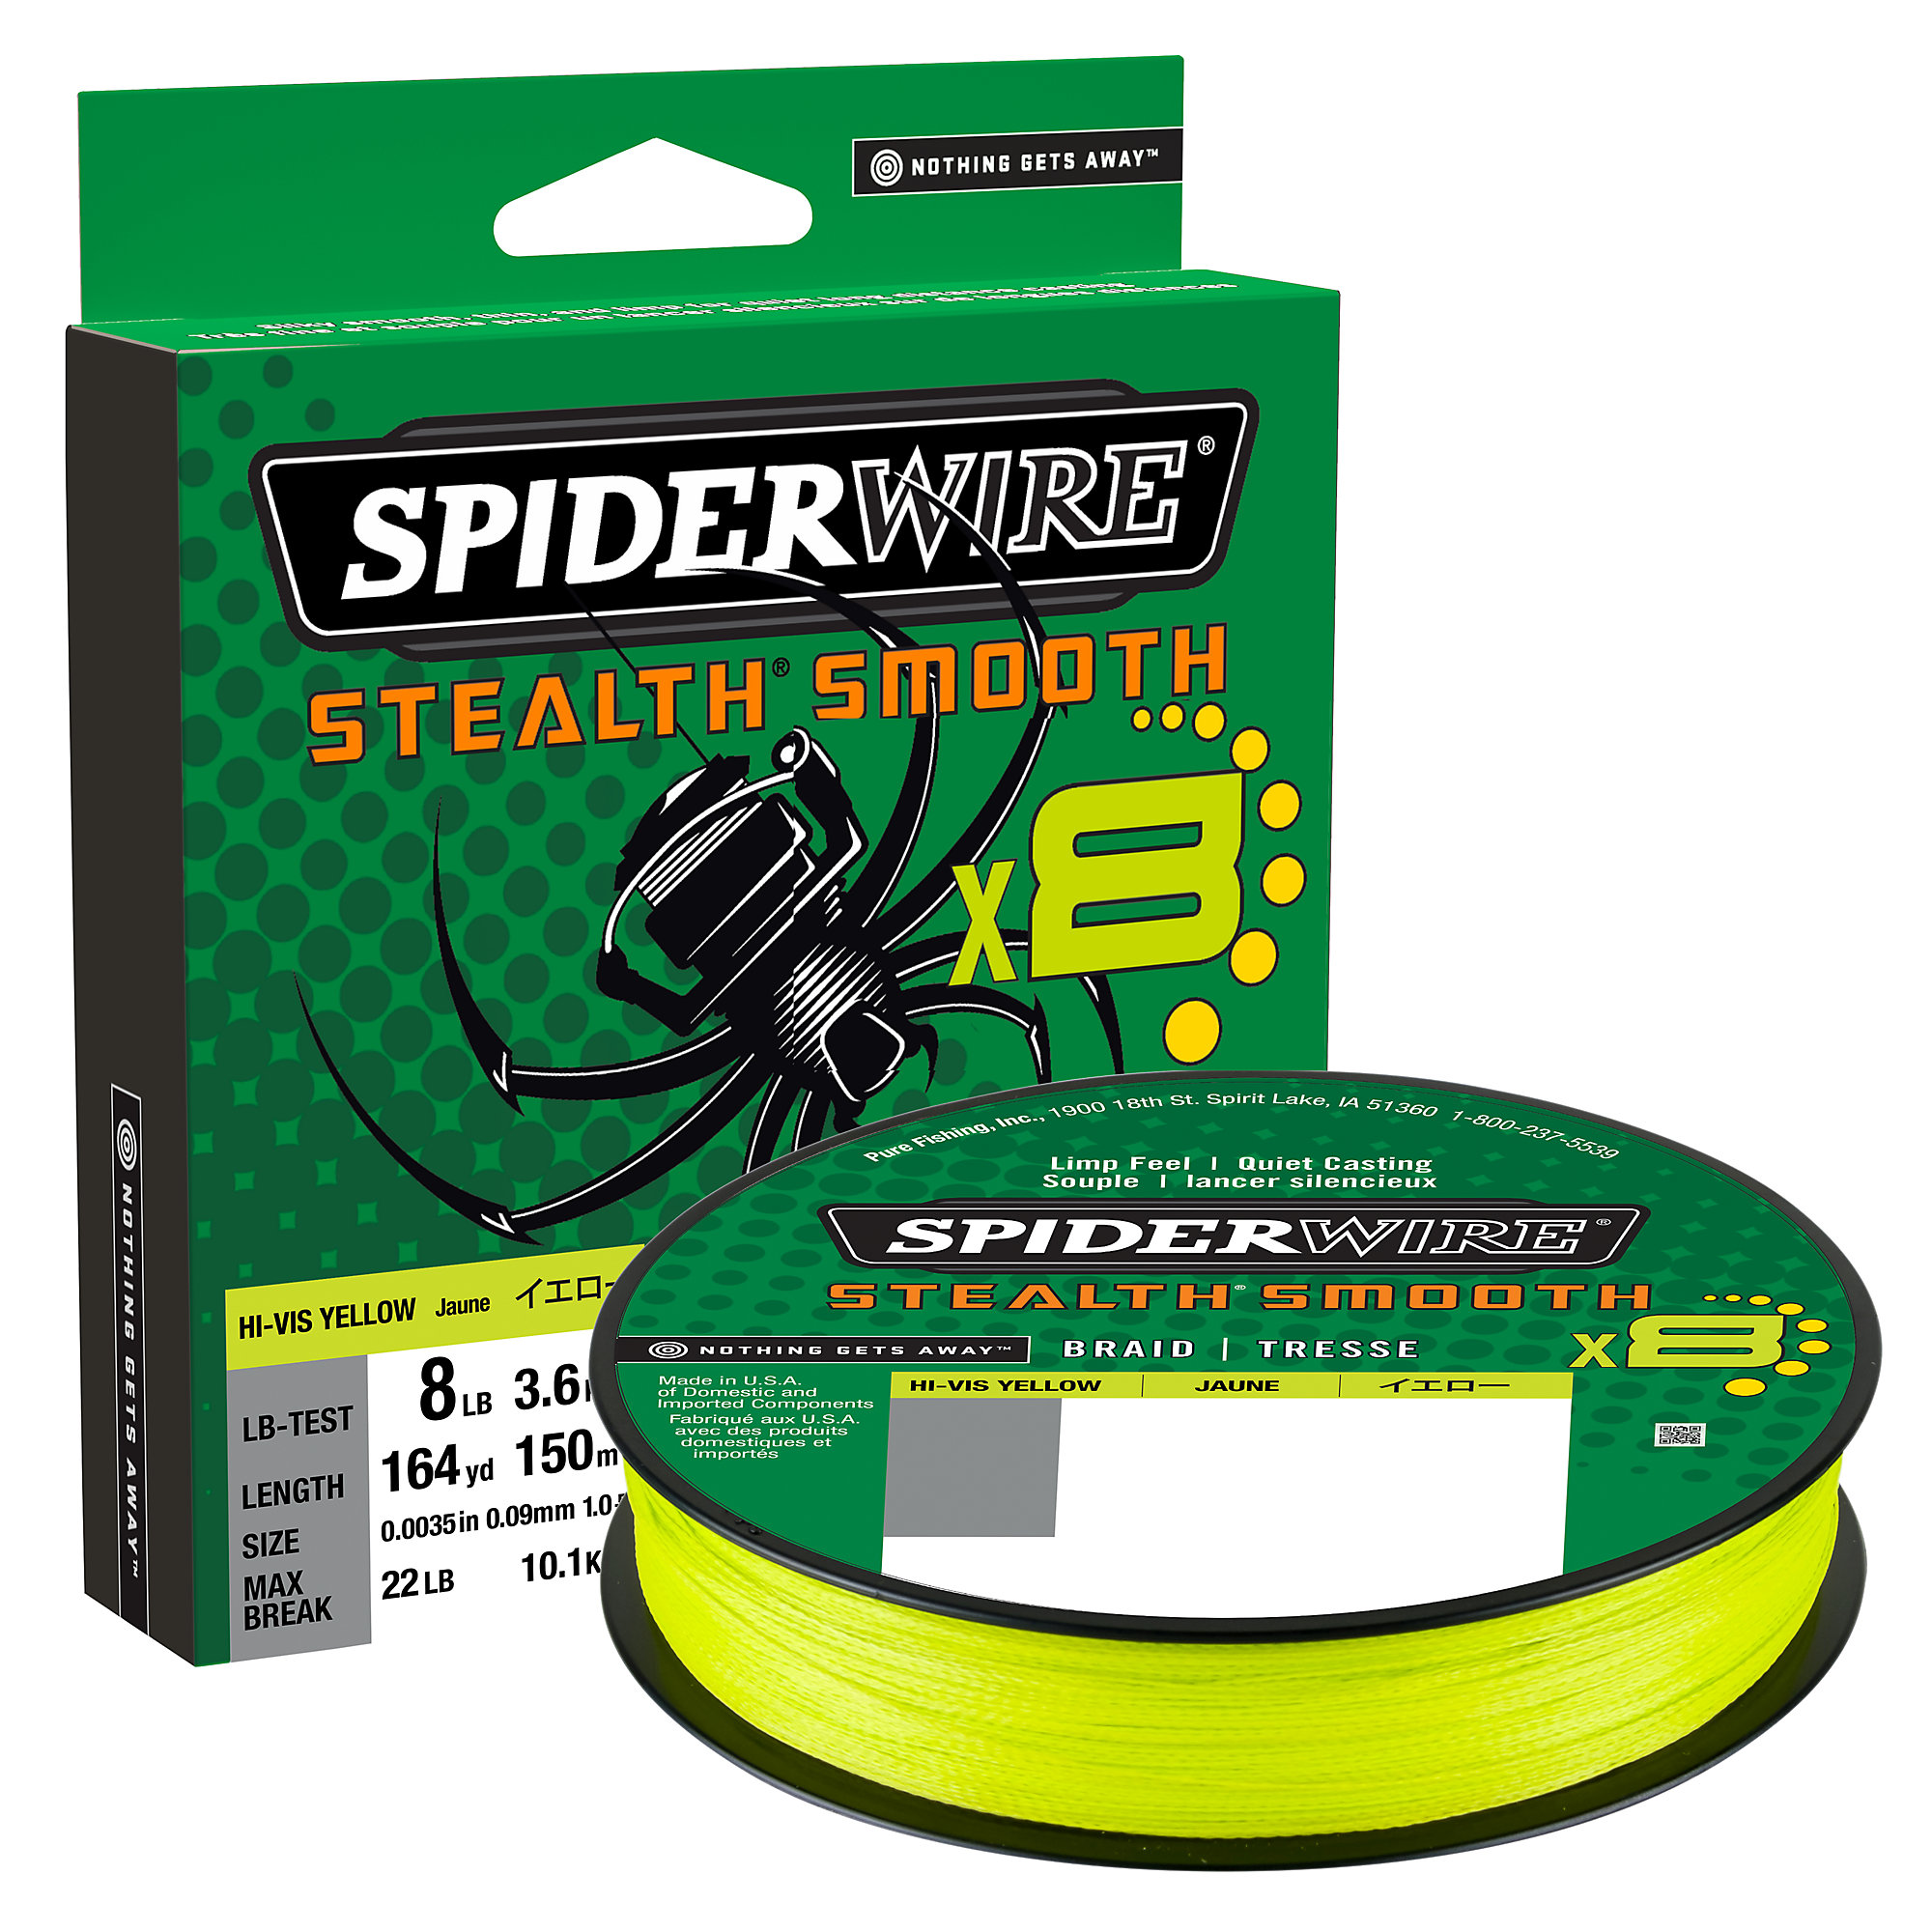 https://www.fishingmegastore.com/hires/spiderwire/stealth__smooth8_stealth_smooth8_yellow.jpg